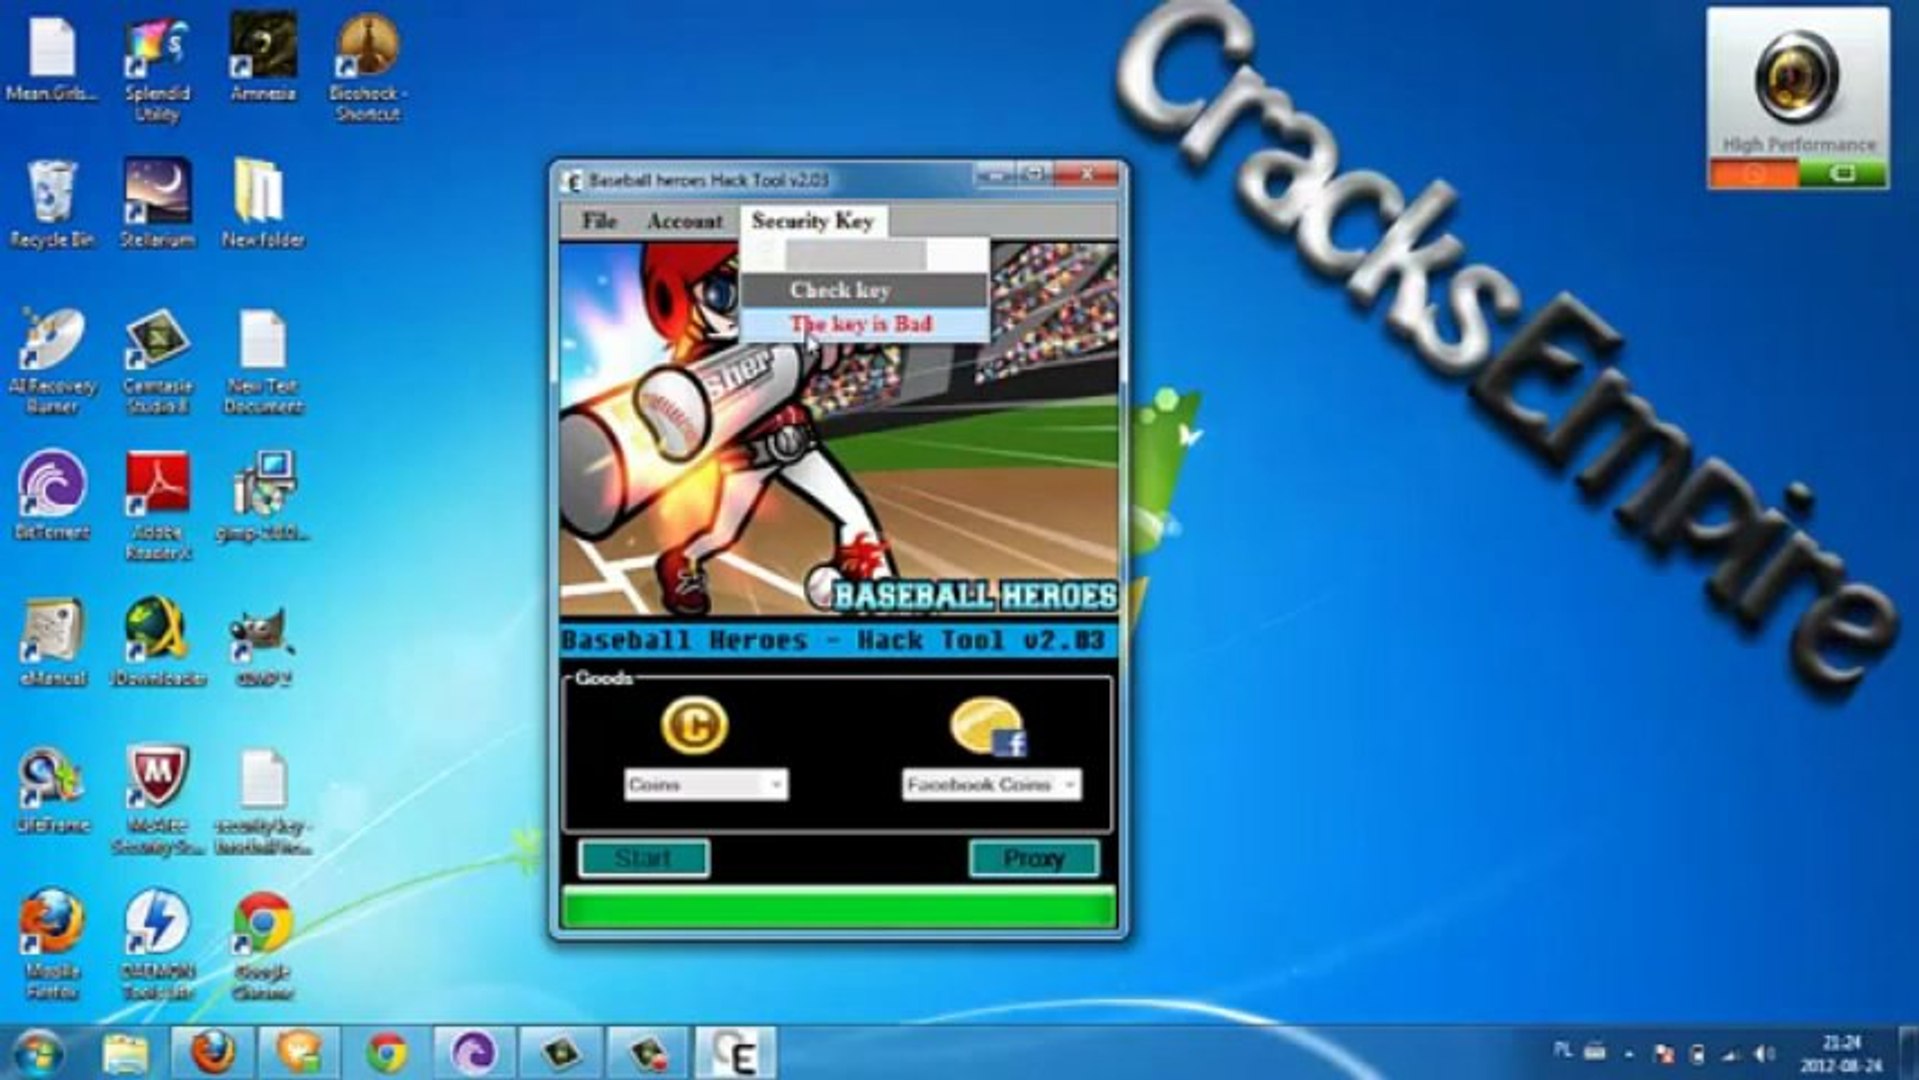 Baseball Heroes - Cheat Tool v2.03 Free Download from RapidShare - video  Dailymotion